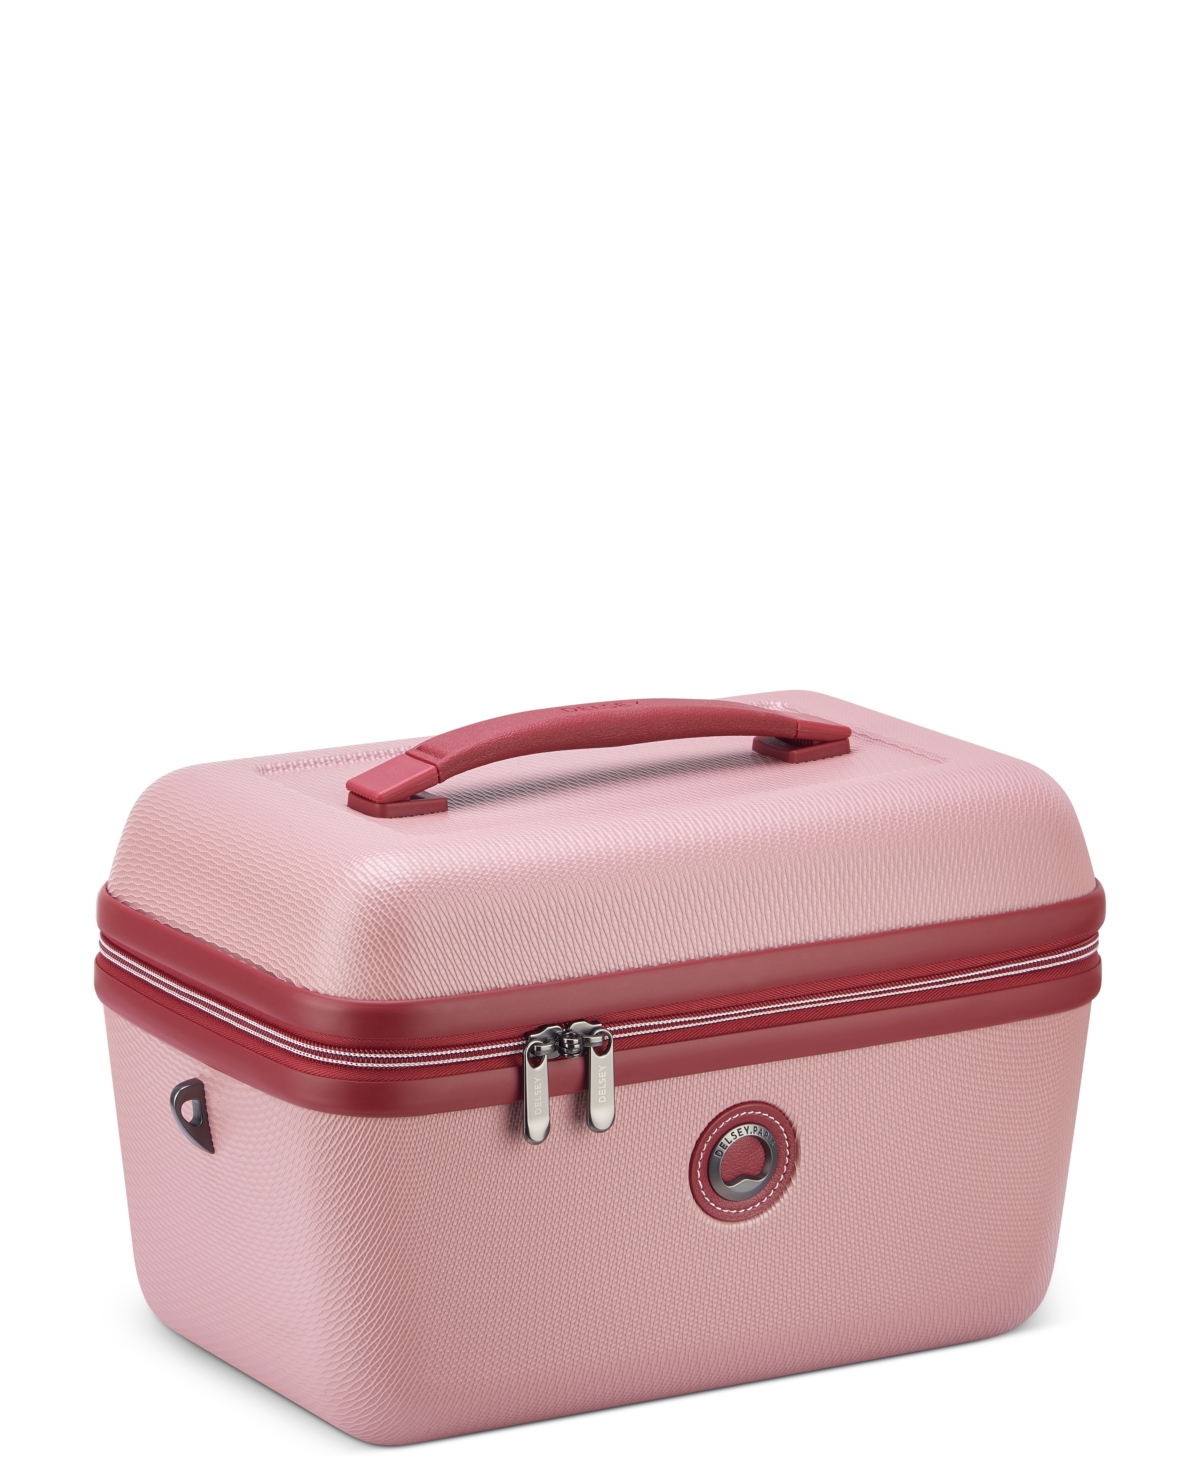 Chatelet Air 2.0 Beauty Case - Pink